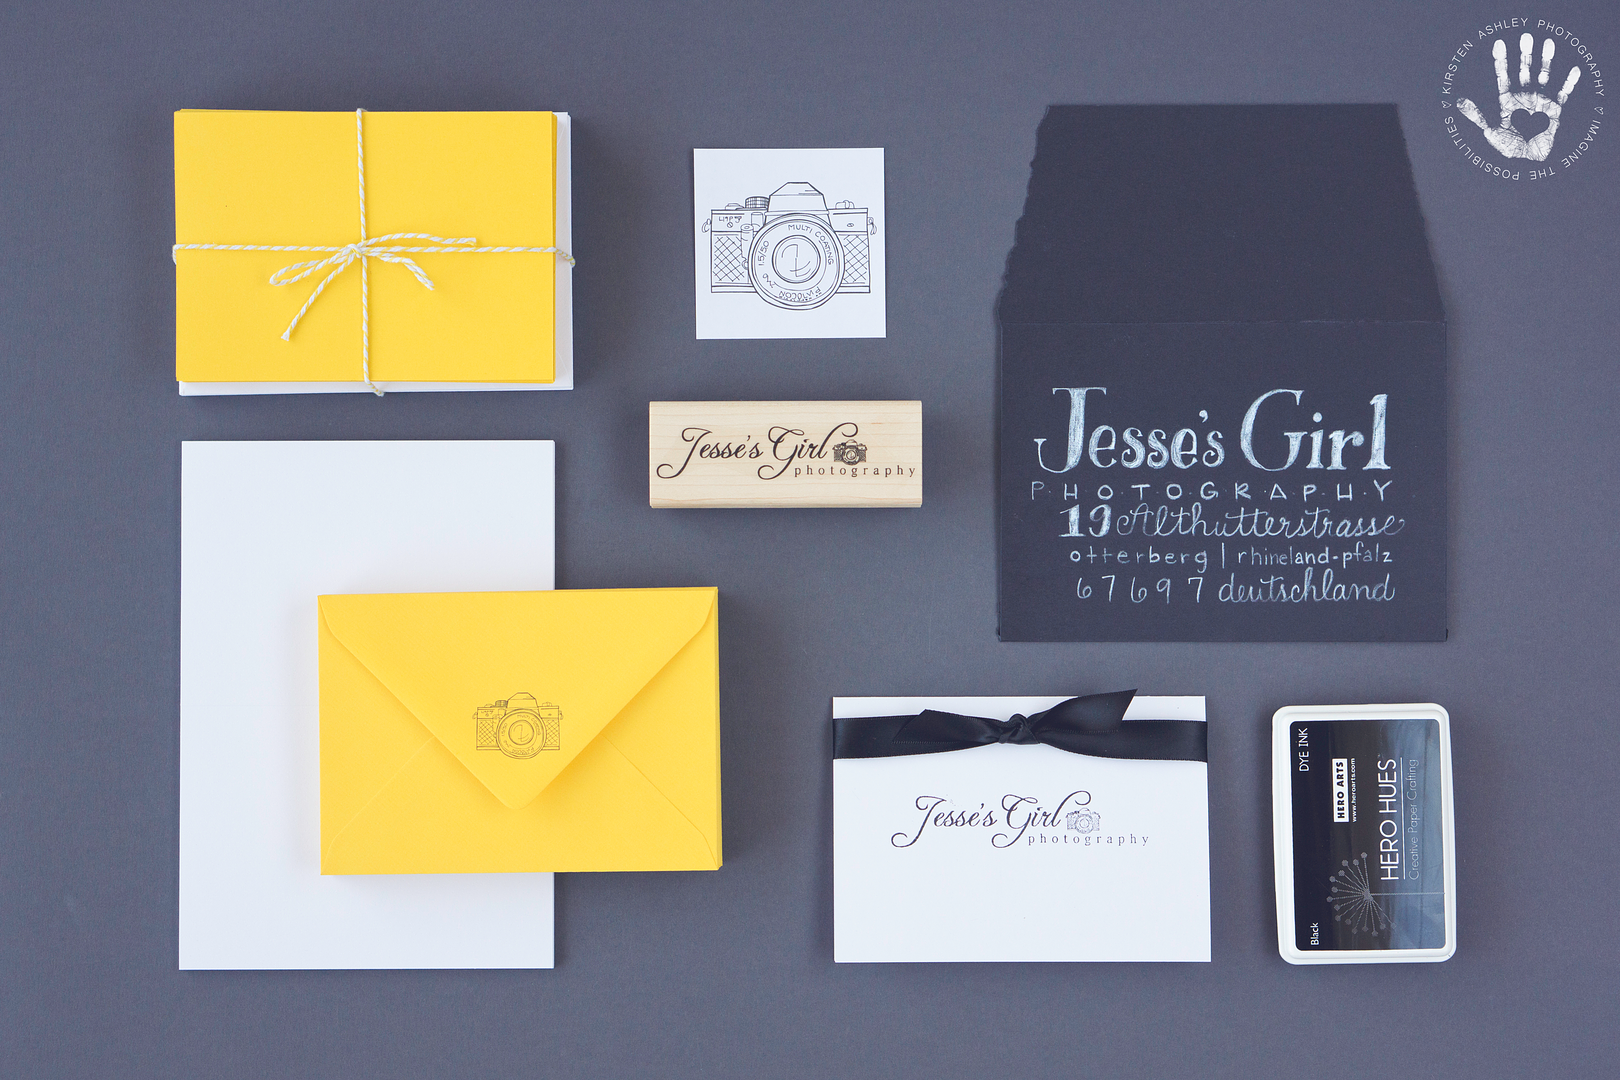 Jesse's Girl Photography Branding by Kirsten Ashley Photography & Design